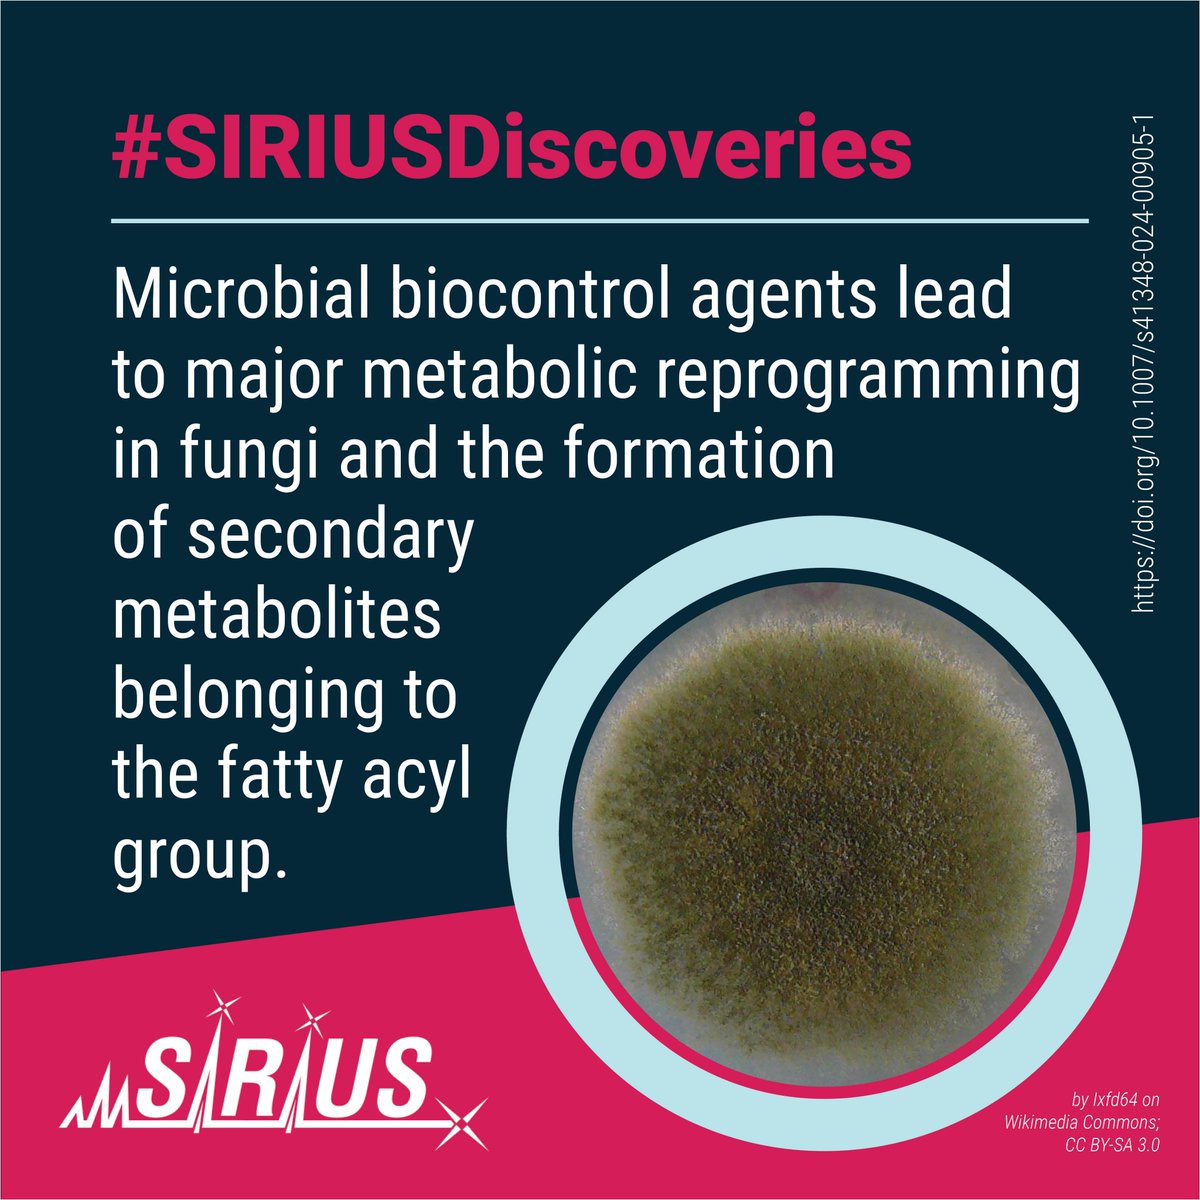 Microbial biocontrol agents lead to major metabolic reprogramming in #fungi. Using SIRIUS, researchers found that many of the #SecondaryMetabolites belong to the group of fatty acyls. 

More #SIRIUSDiscoveries: bright-giant.com/discoveries/

#MassSpectrometry #MSSoftware